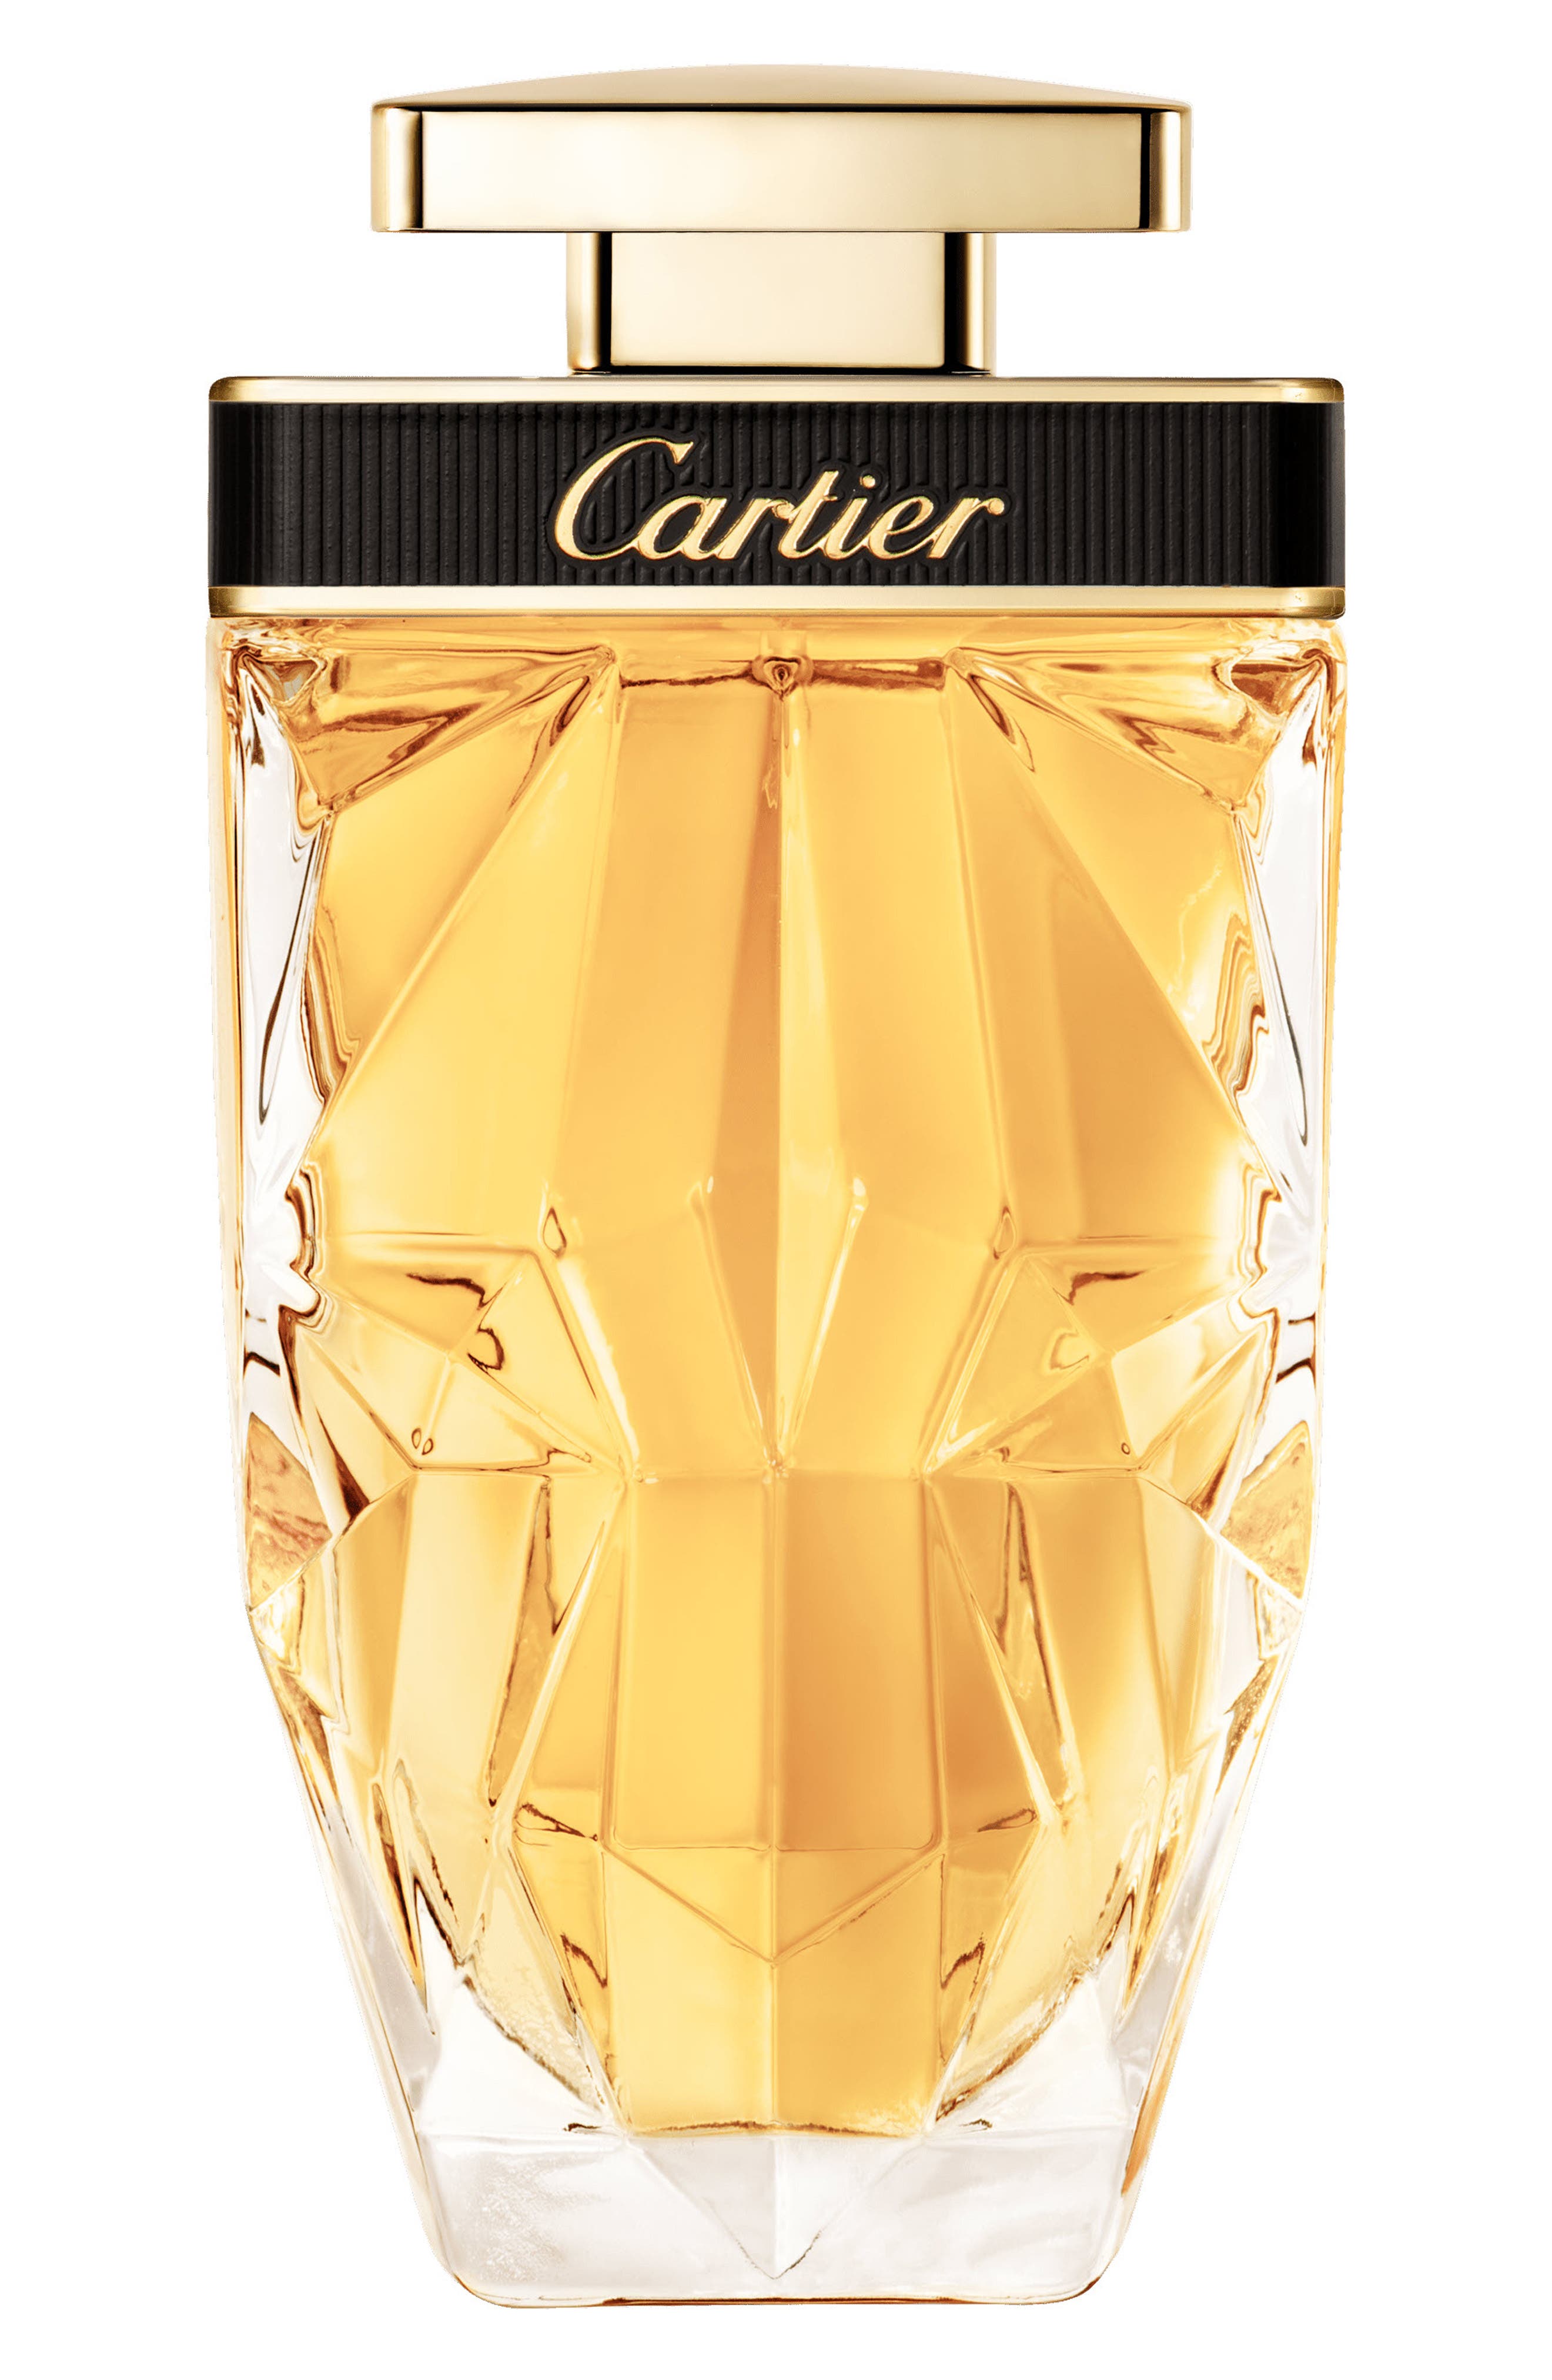 cartier beauty products